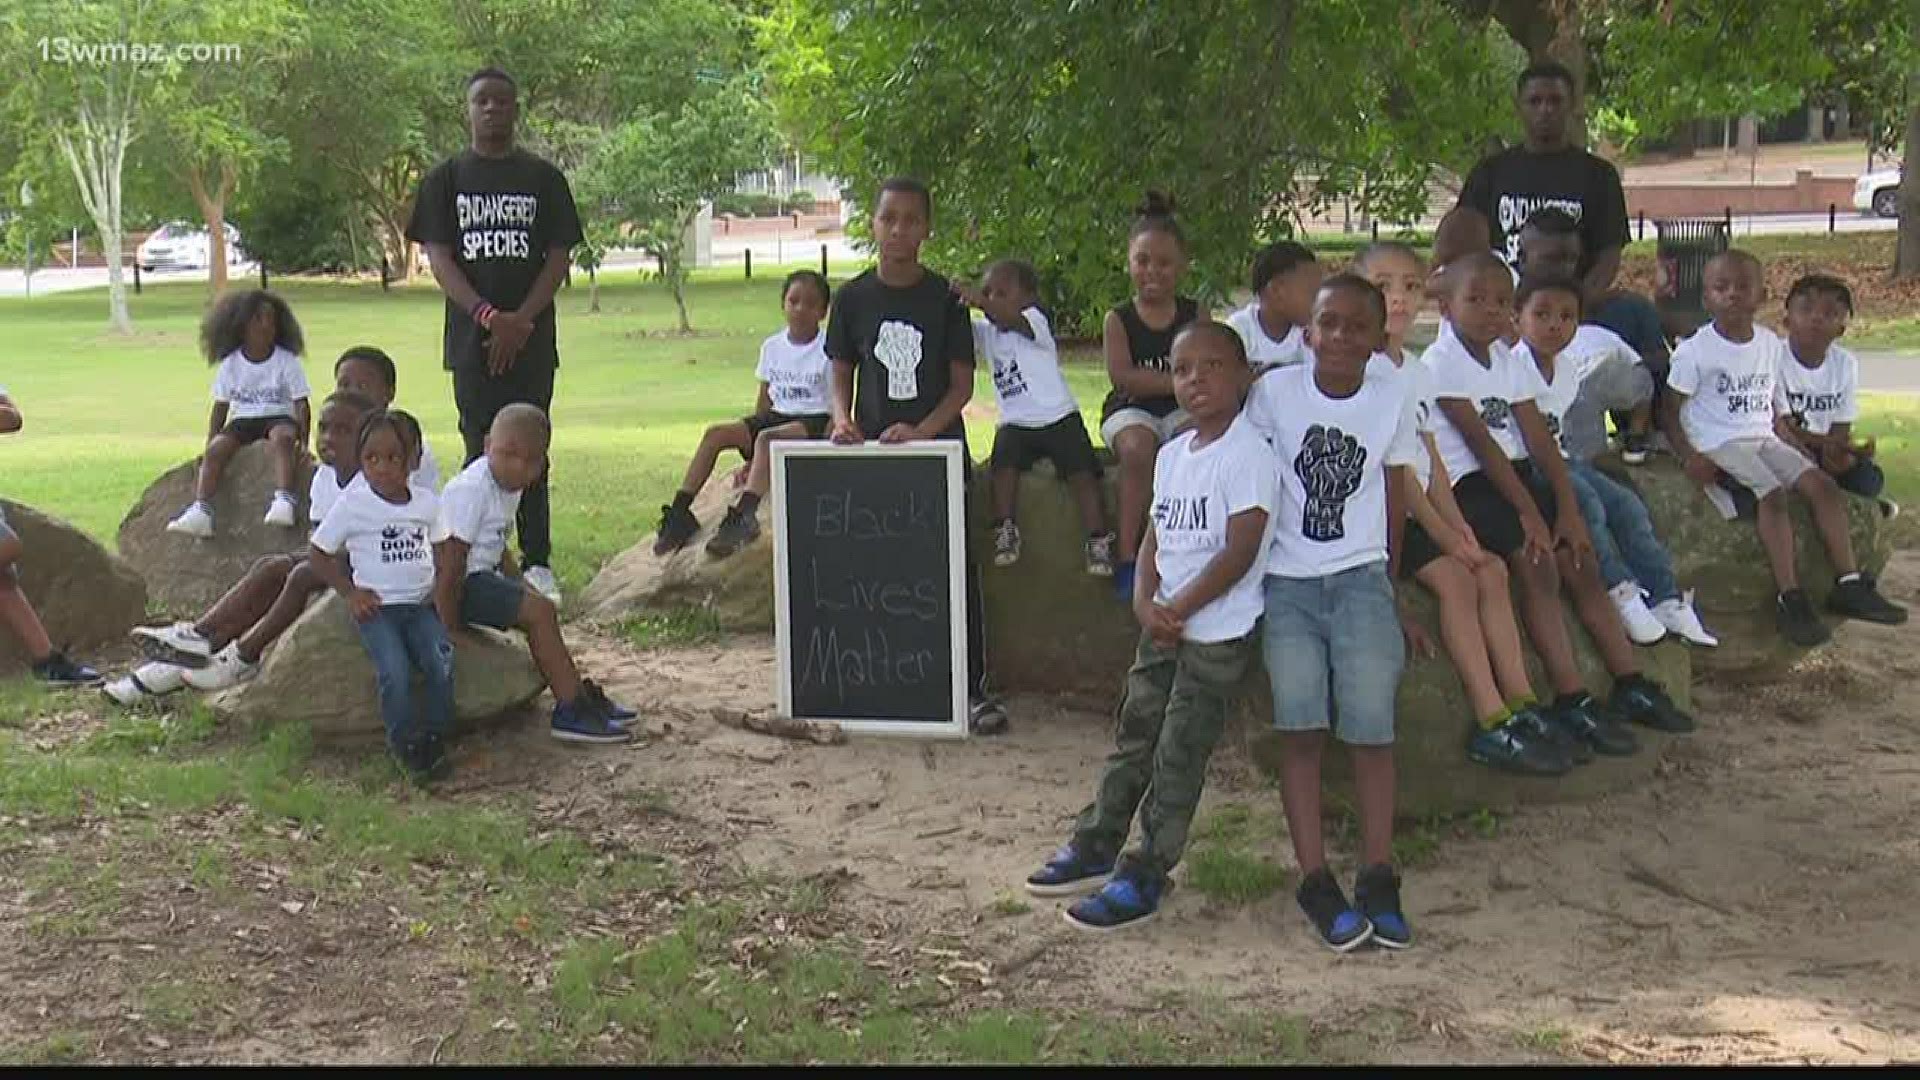 One Macon woman found a special way to bring some young men together Wednesday night.